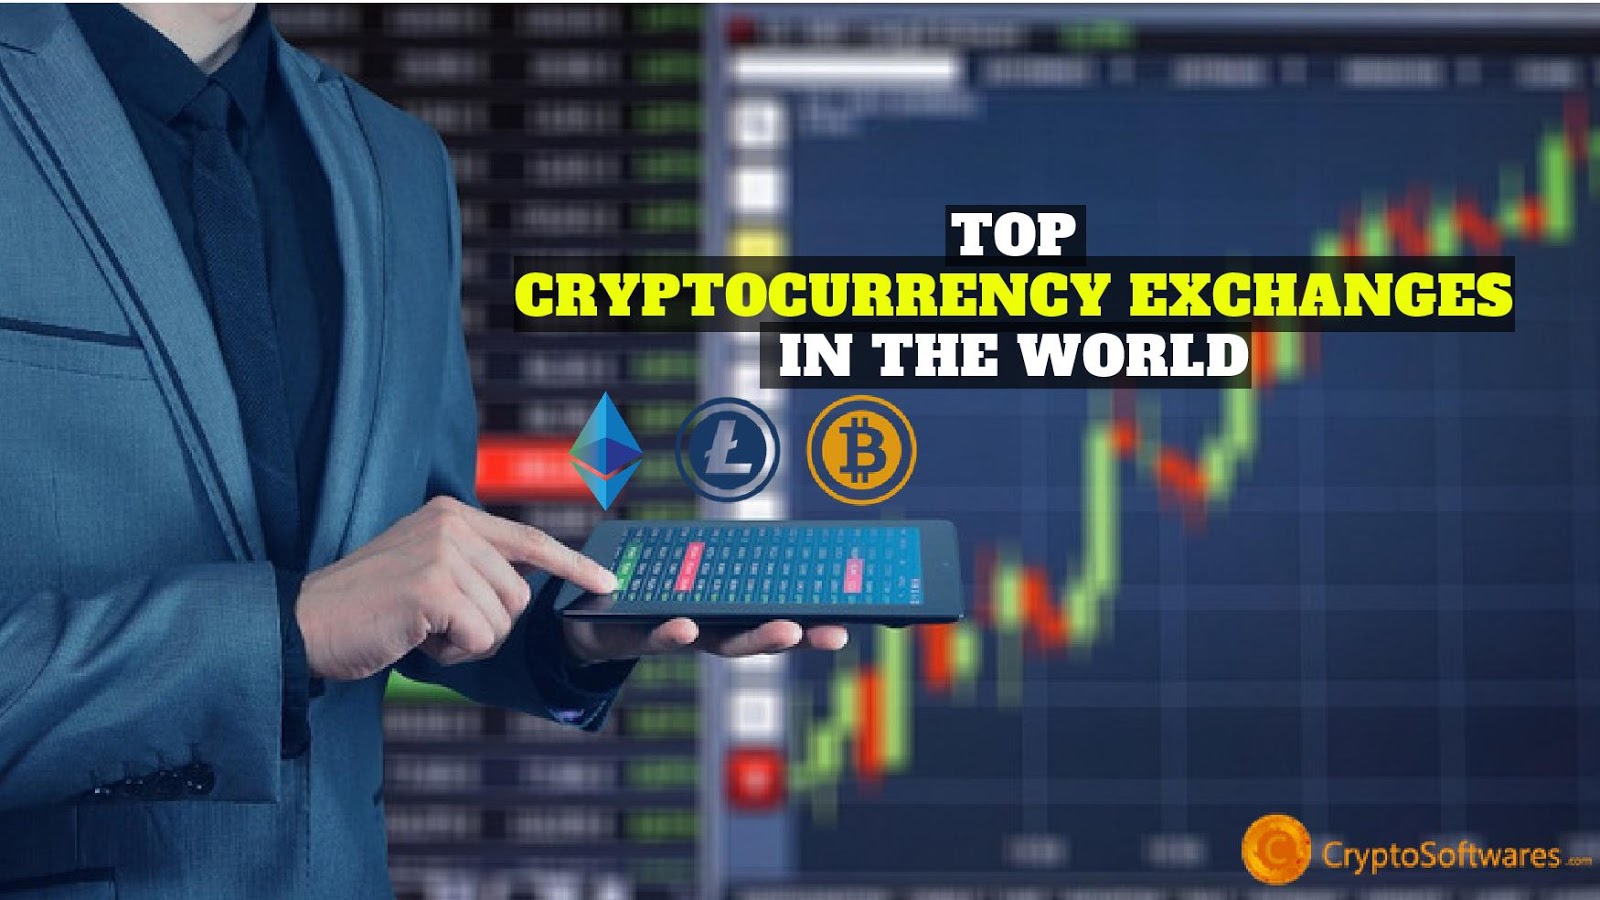 CryptoSoftwares Blogs- Blockchain Articles , Reviews & Much more: Top Cryptocurrency Exchanges ...